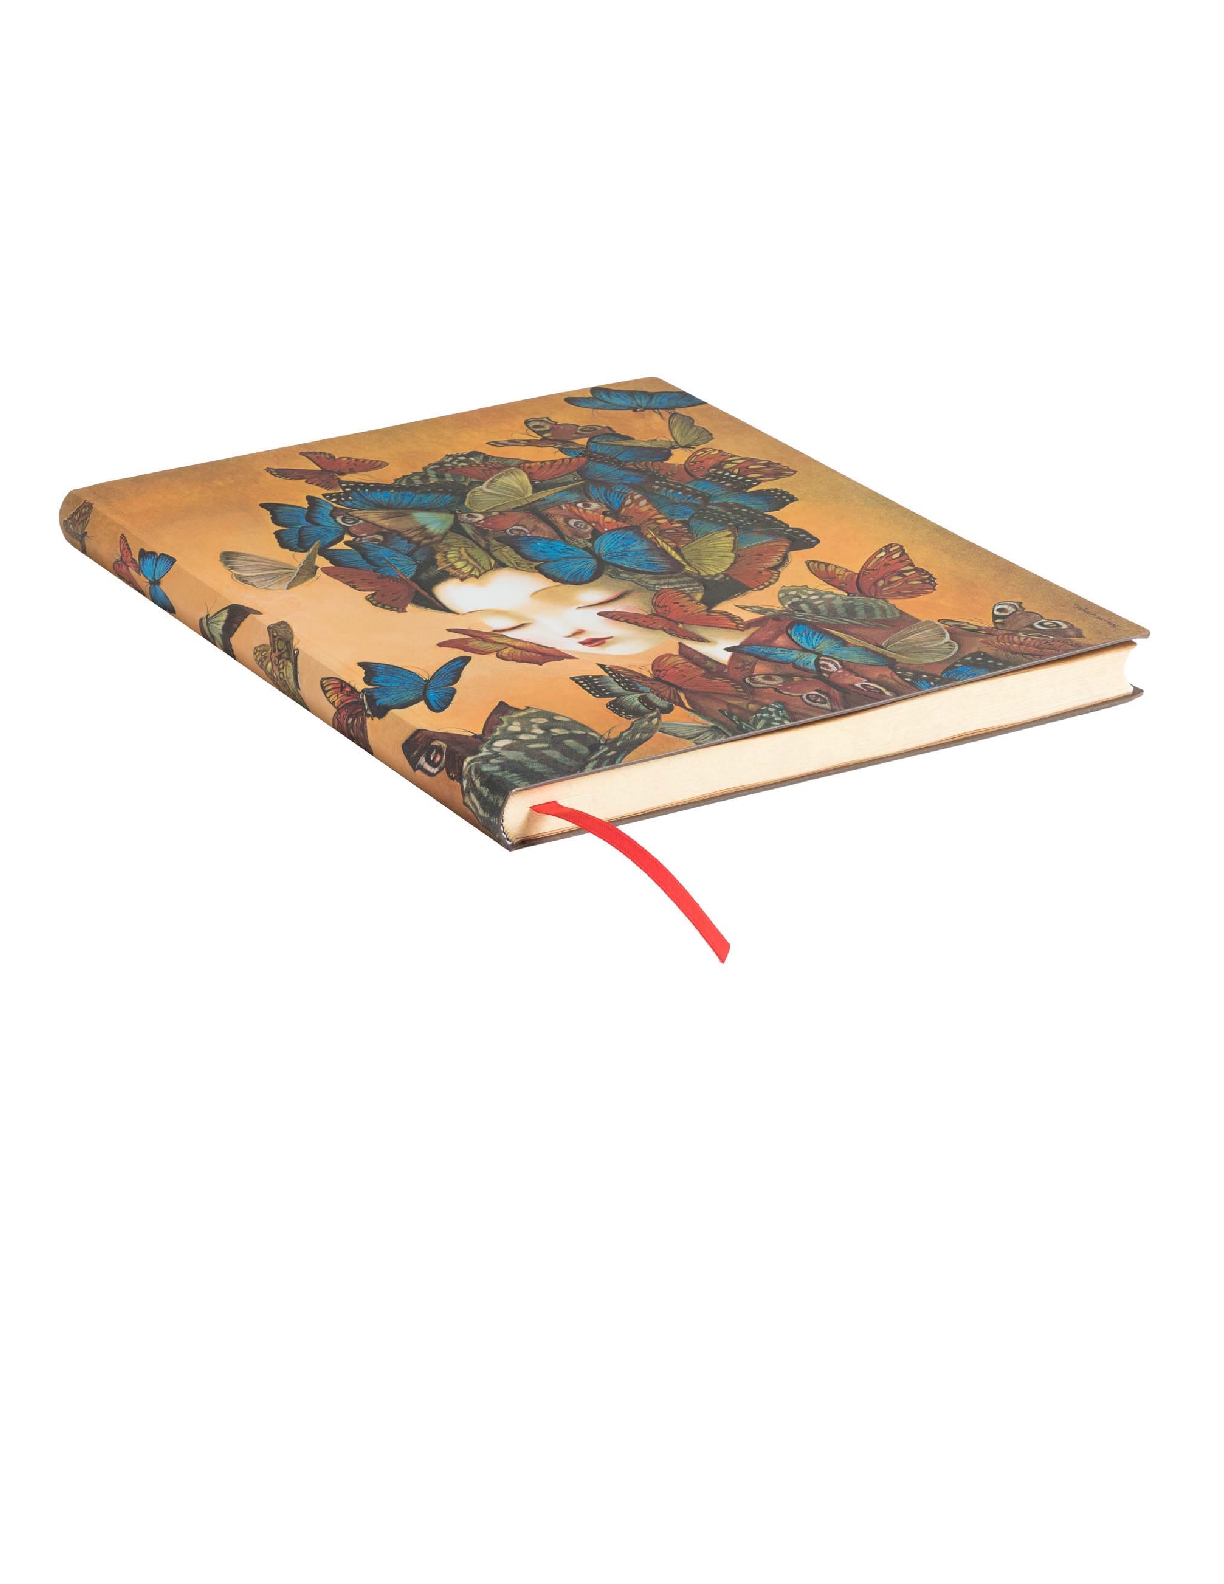 Madame Butterfly, Esprit de Lacombe, Softcover Flexi, Ultra, Unlined, 176 Pg, 100 GSM